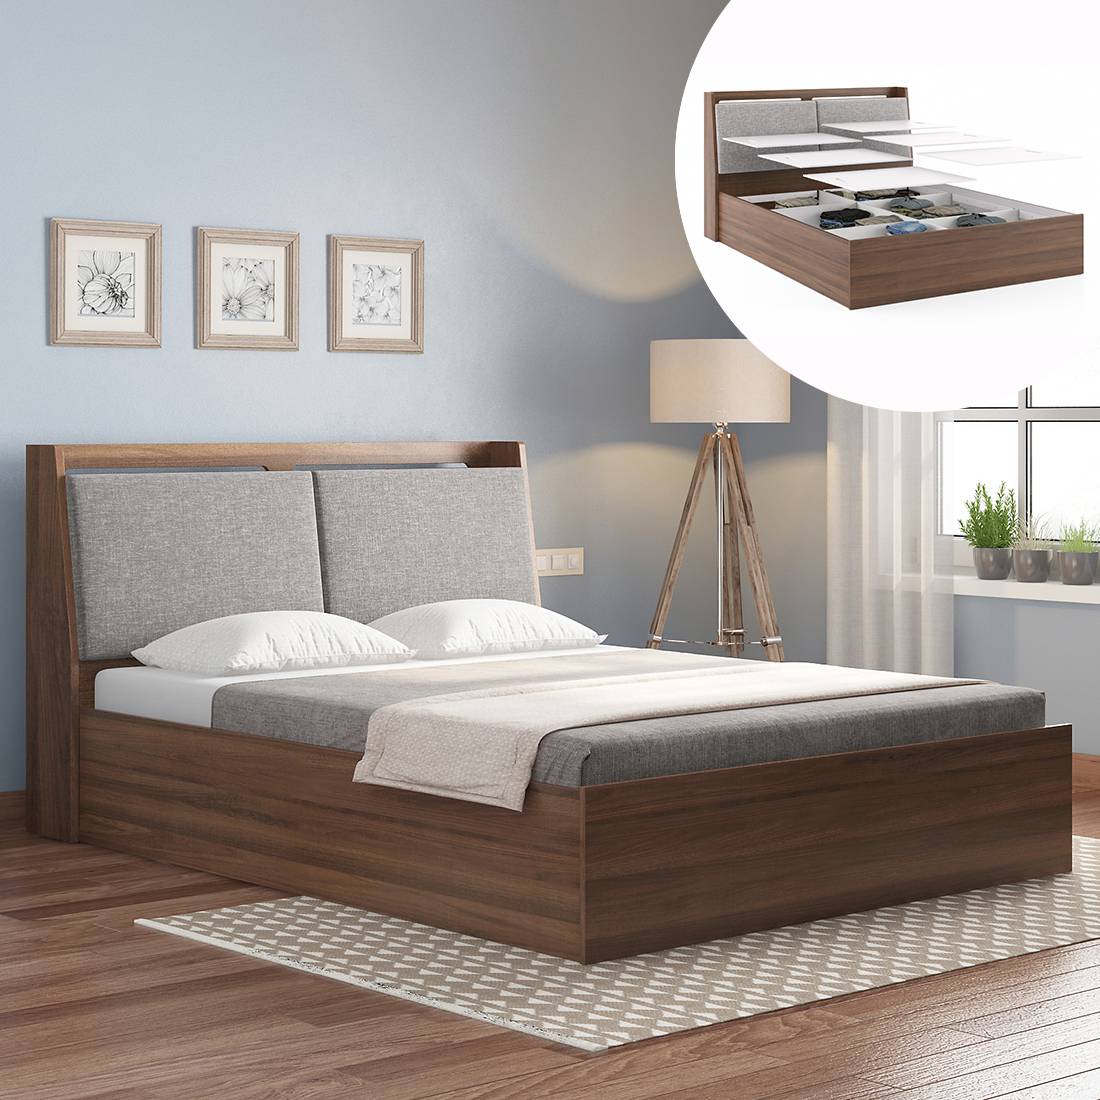 Storage Bed Beds, Queen Size Wooden Headboard With Lights